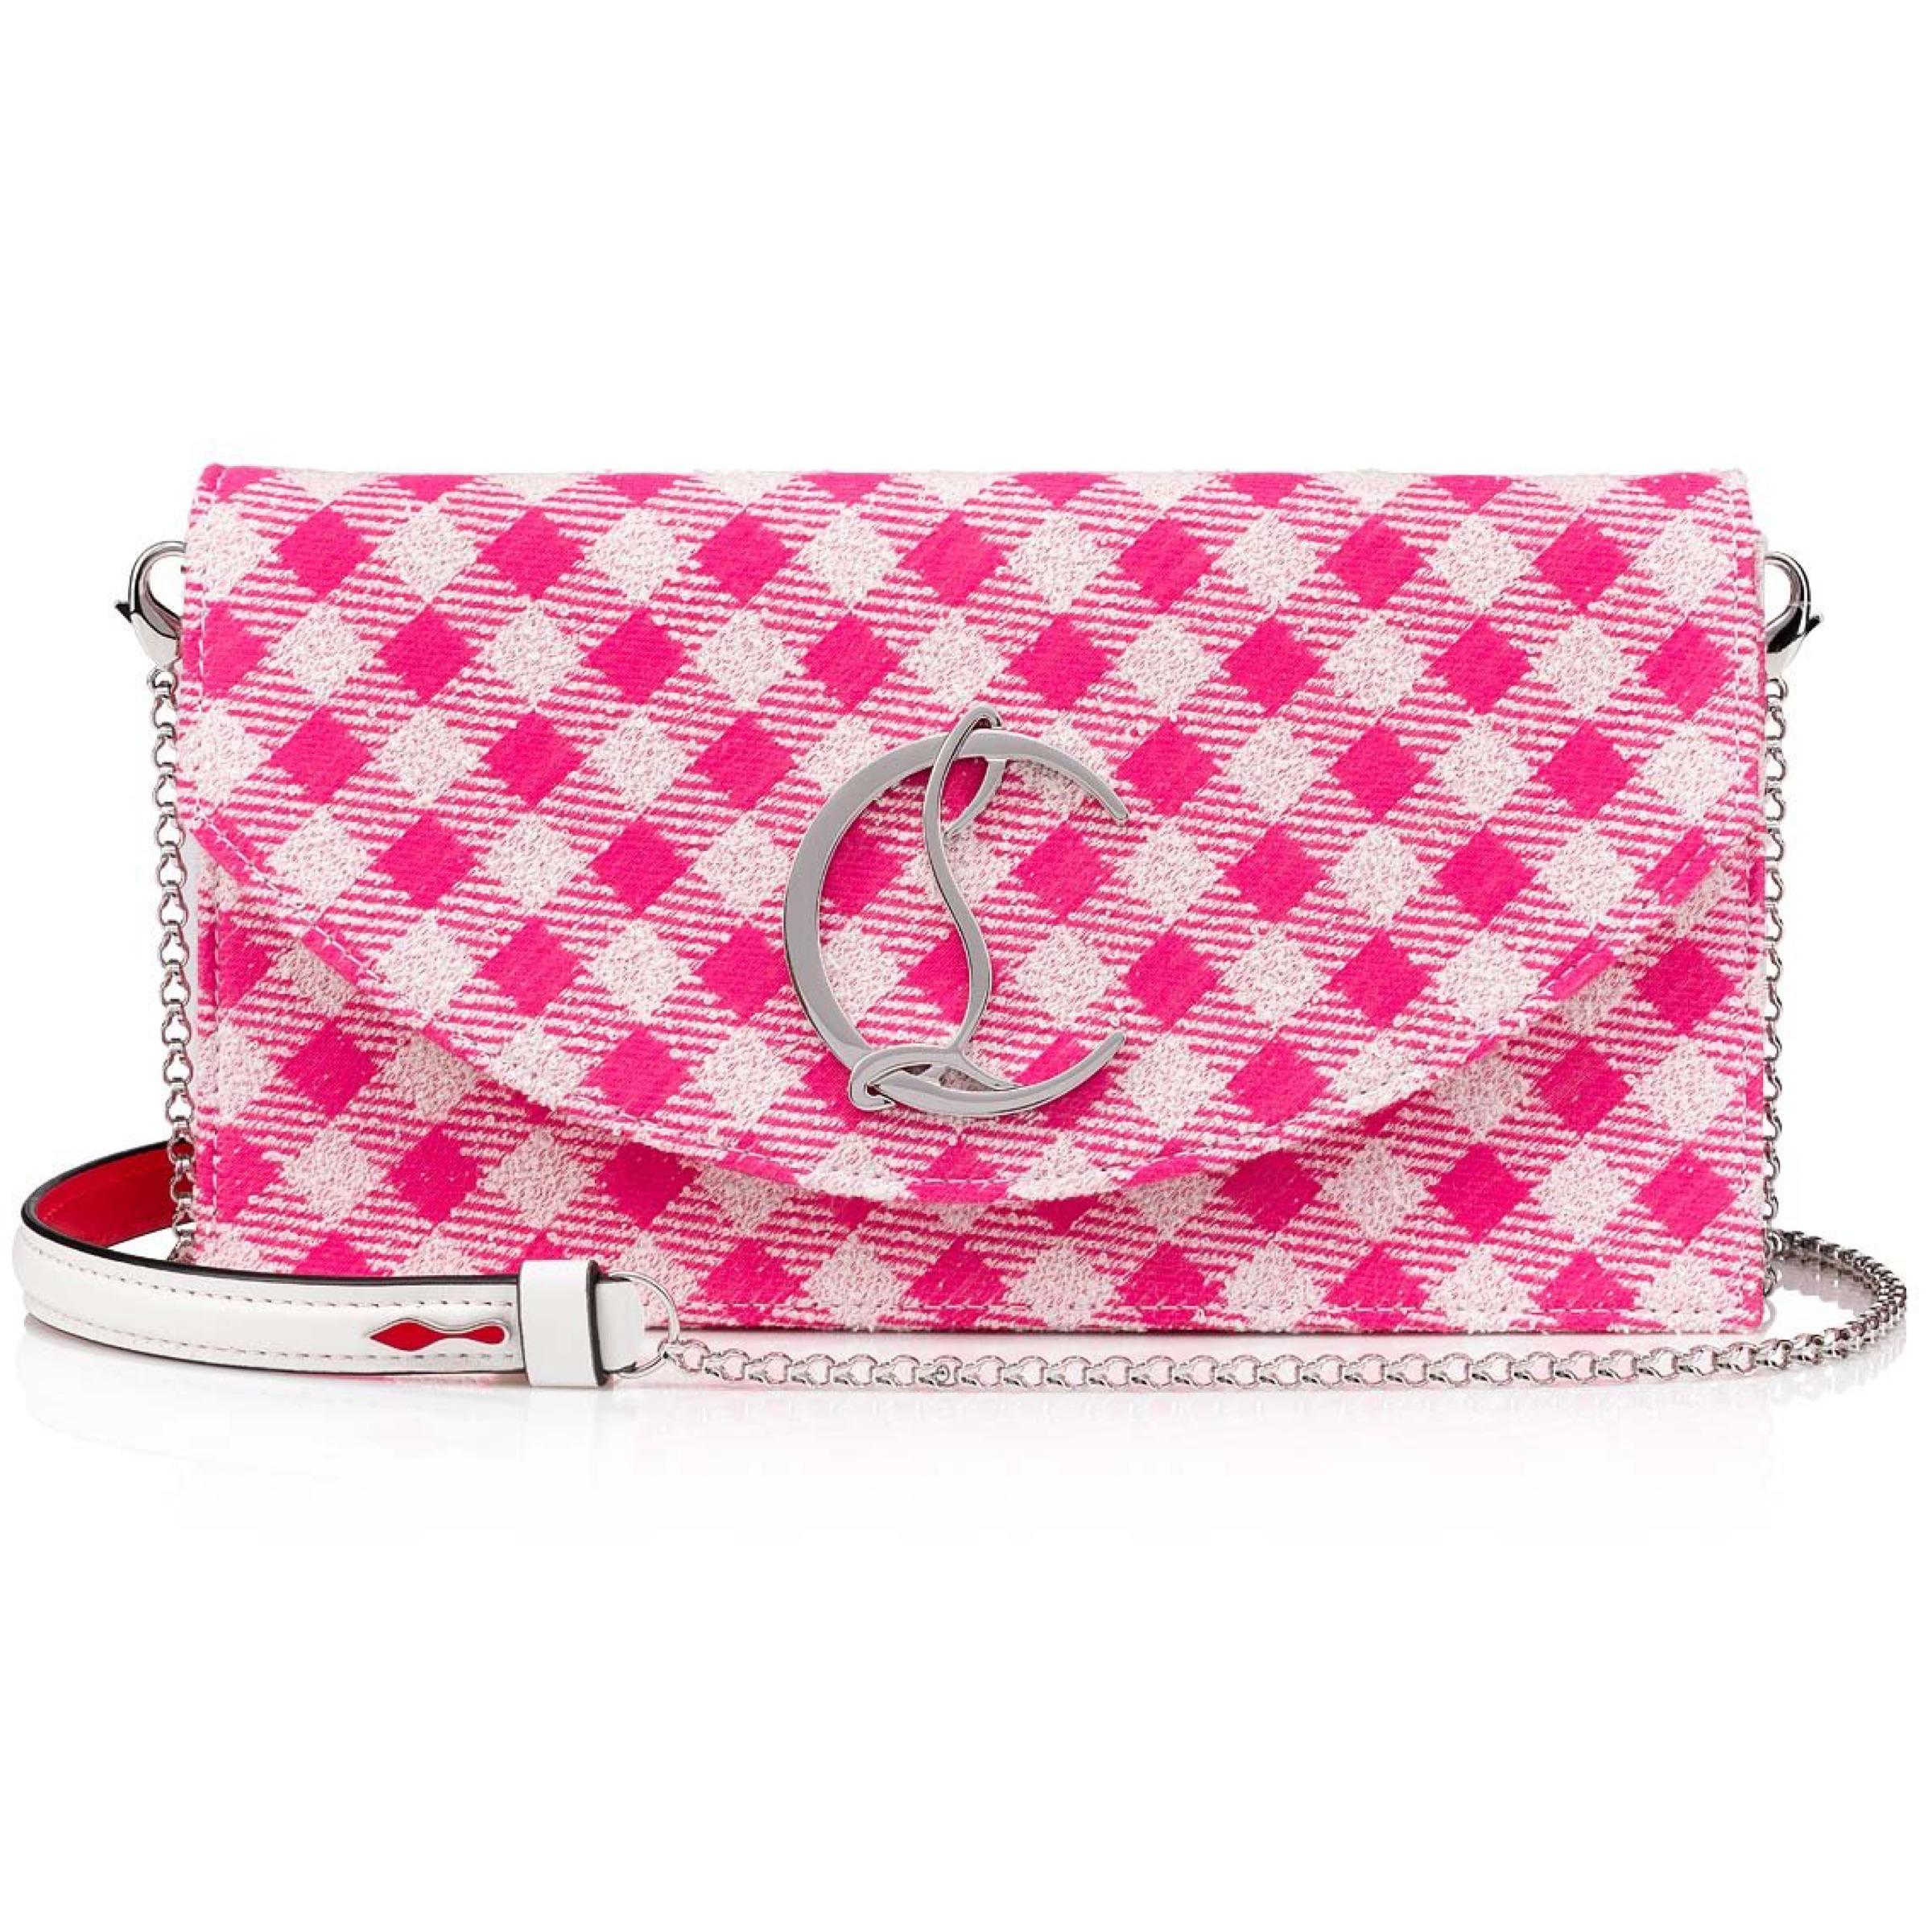 New Christian Louboutin Pink Vichy Canvas Crossbody Shoulder Bag

Authenticity Guaranteed

DETAILS
Brand: Christian Louboutin
Gender: Women
Category: Crossbody bag
Condition: Brand new
Color: Pink
Material: Canvas
Flat pocket and card